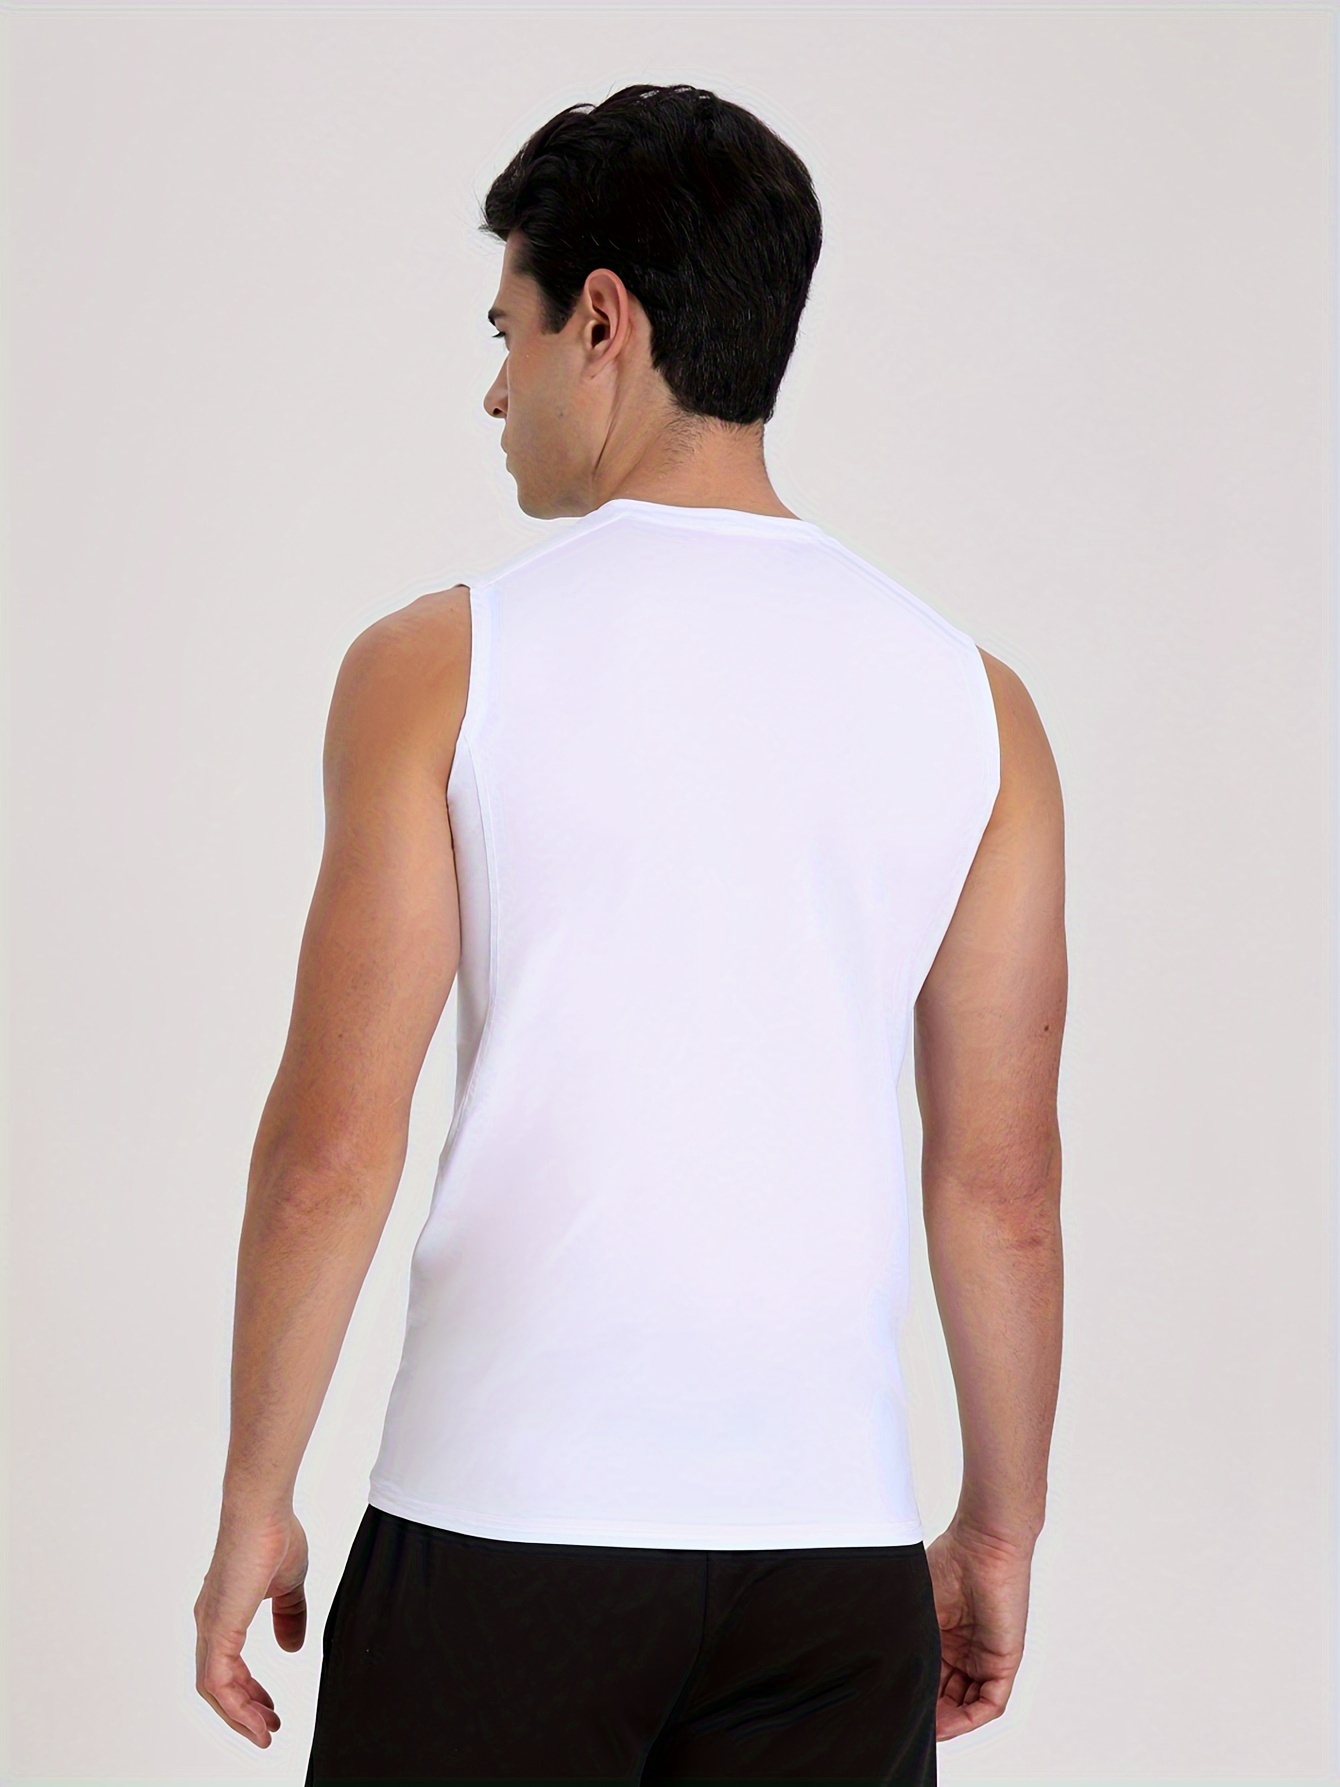 Mens Tank Top Mens Summer Breathable Ice Silk T Shirts Cultivate Fitness  Movemen V Neck Vest Blouse Tank Tops White